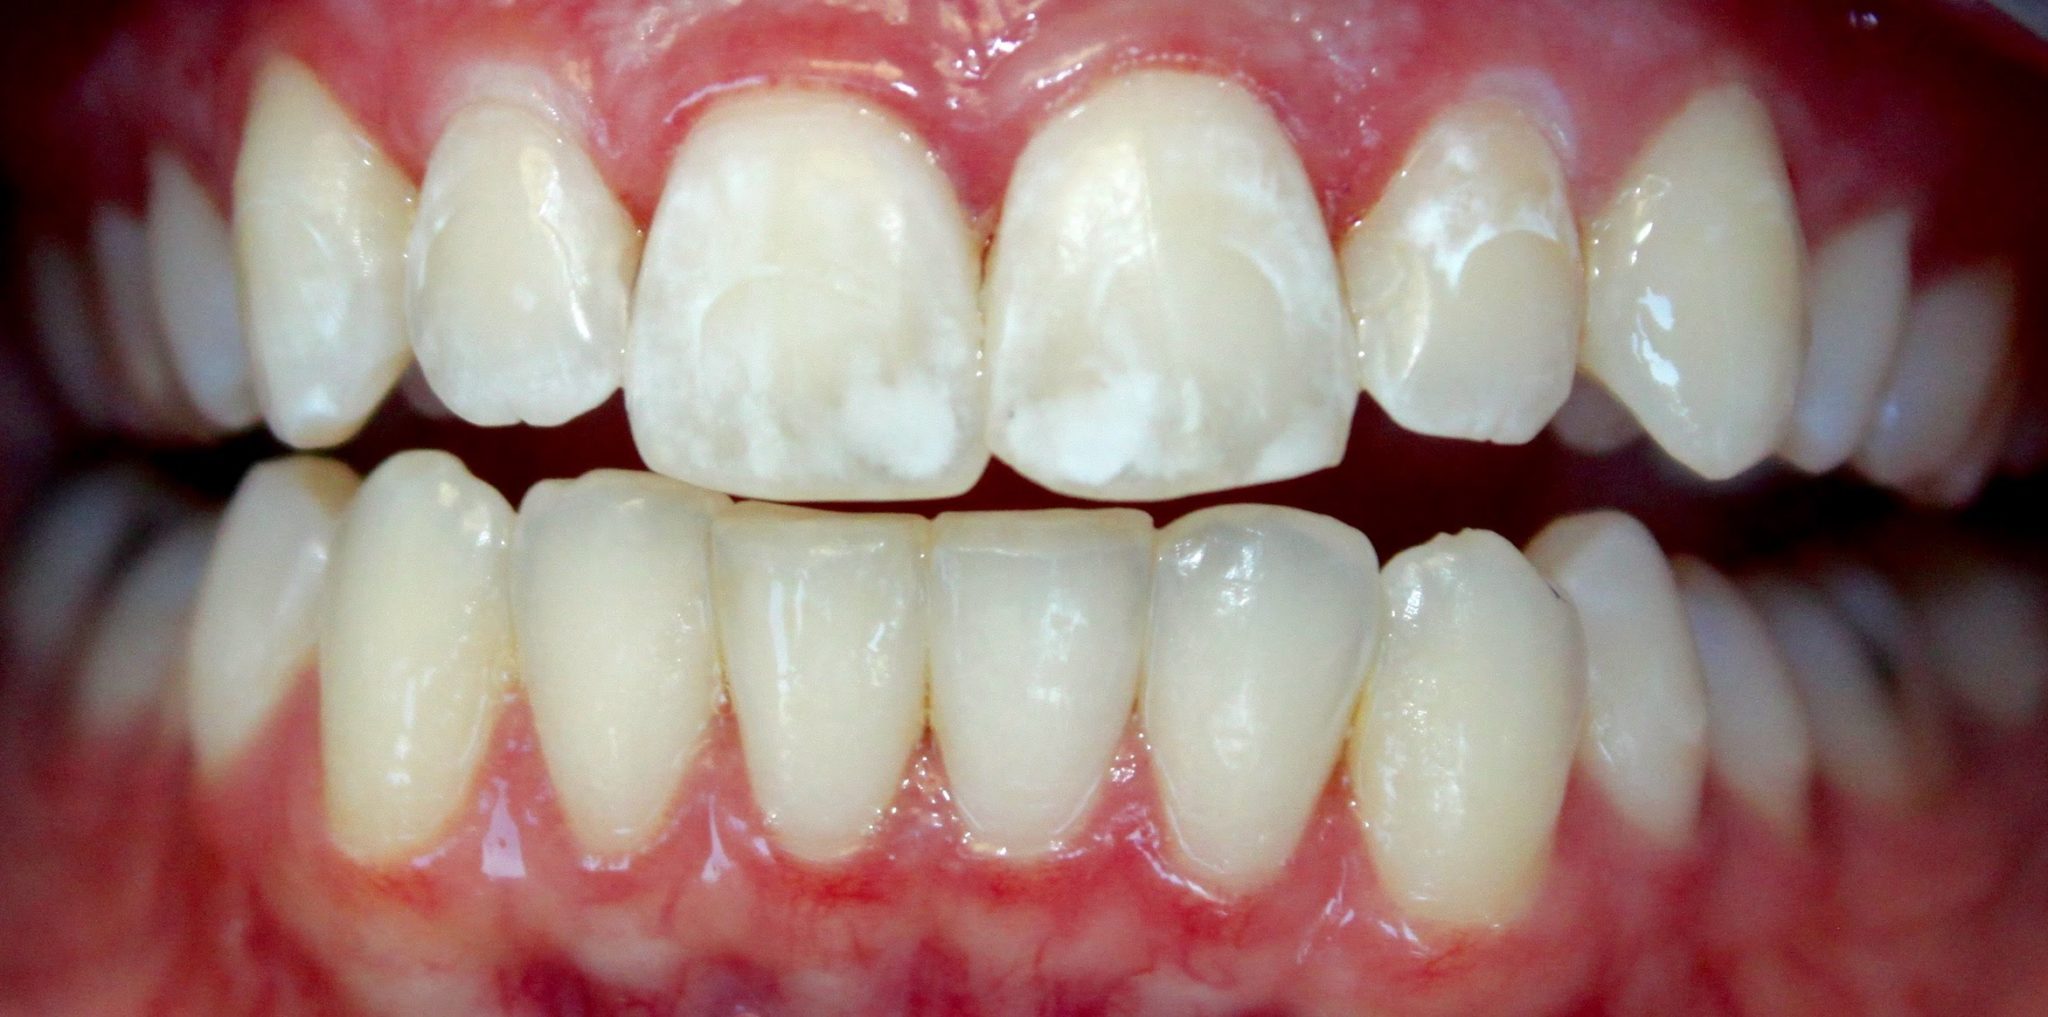 You have white spots on your teeth